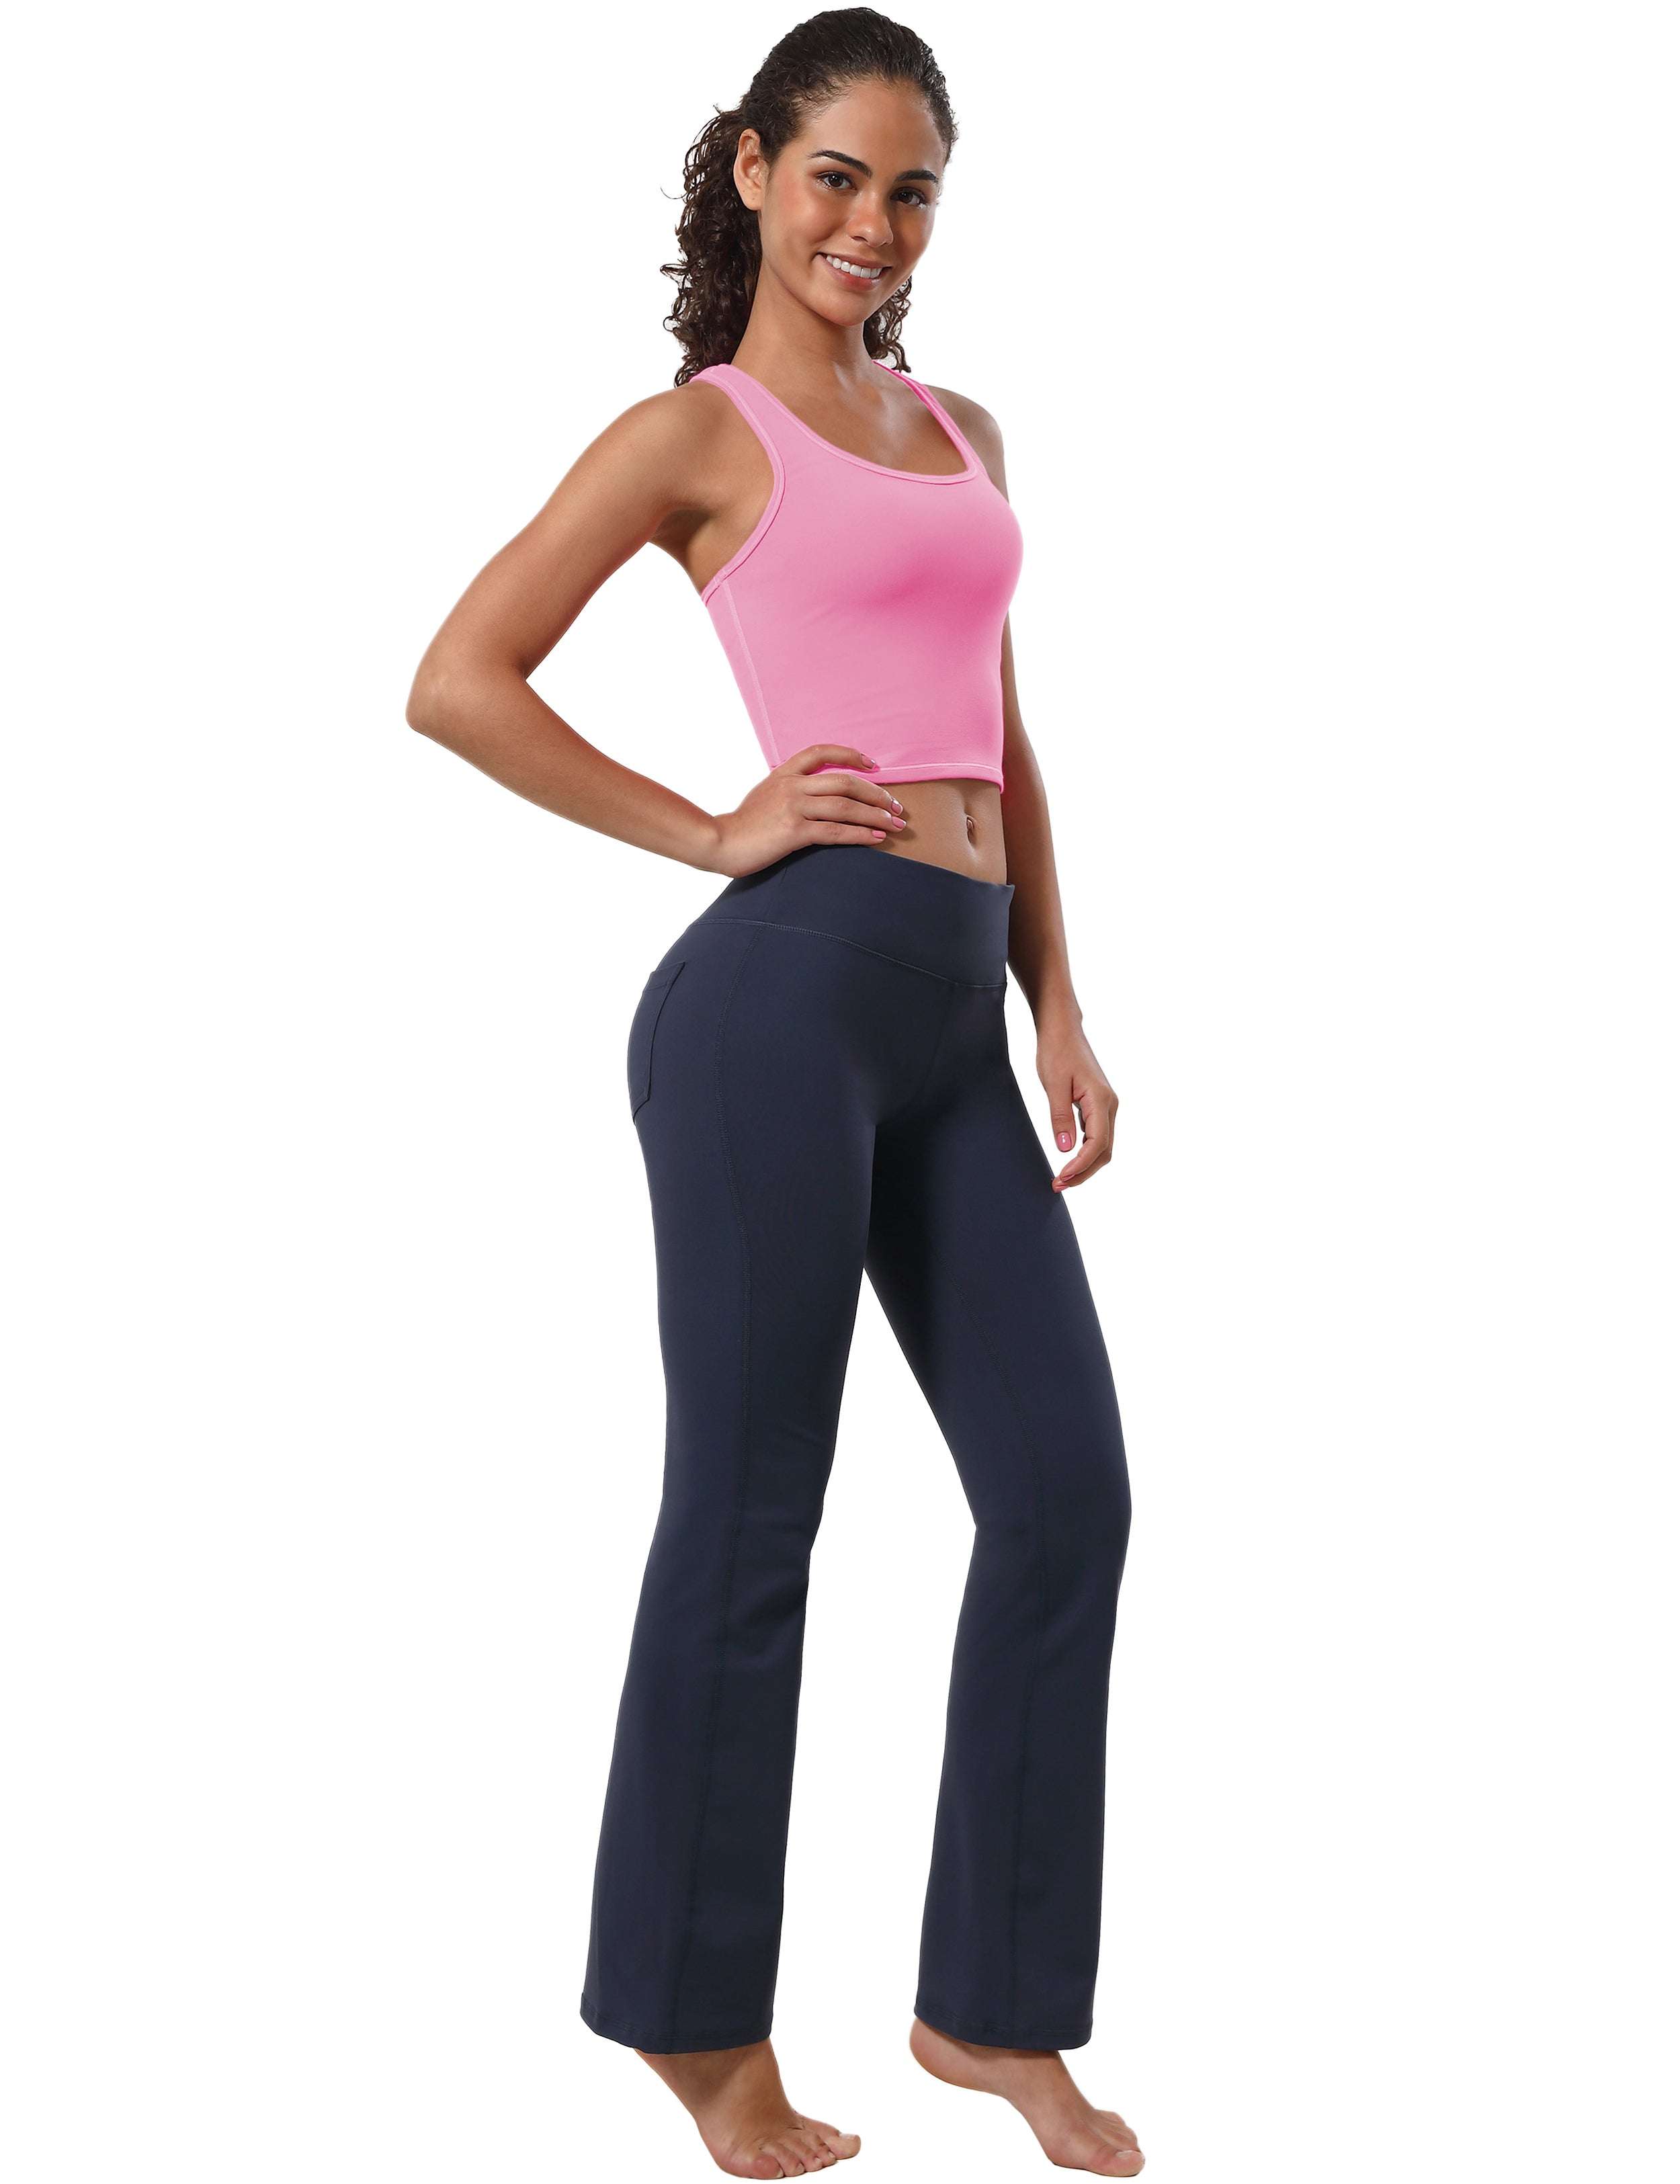 Racerback Athletic Crop Tank Tops lightpink 92%Nylon/8%Spandex(Cotton Soft) Designed for Golf Tight Fit So buttery soft, it feels weightless Sweat-wicking Four-way stretch Breathable Contours your body Sits below the waistband for moderate, everyday coverage